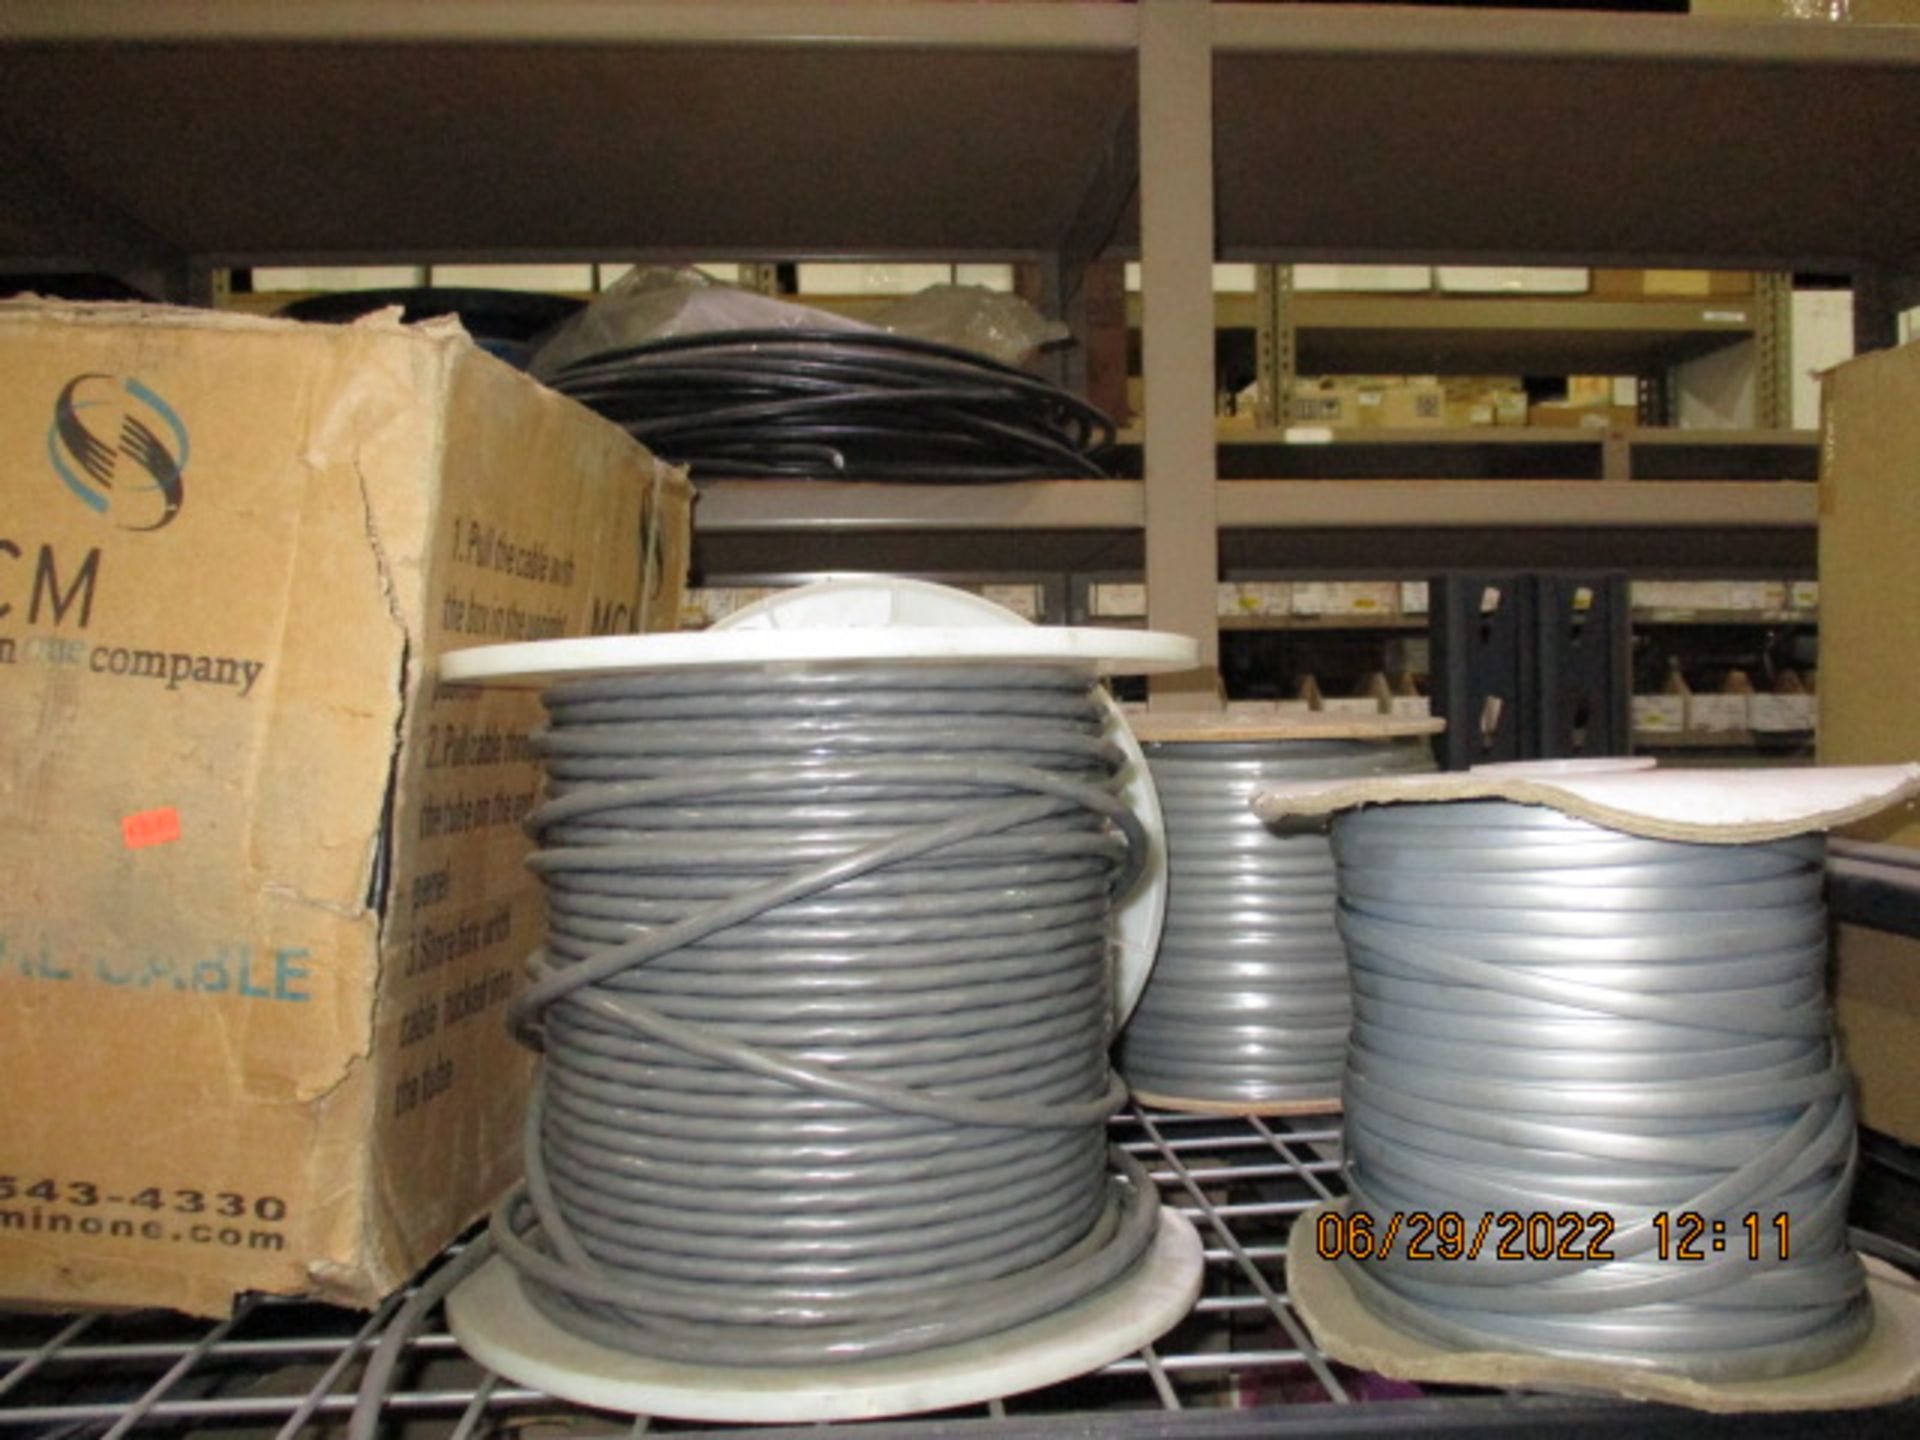 CONTENTS OF SHELVING UNIT CONSISTING OF ASSORTMENT OF CABLE/WIRE - Image 4 of 10